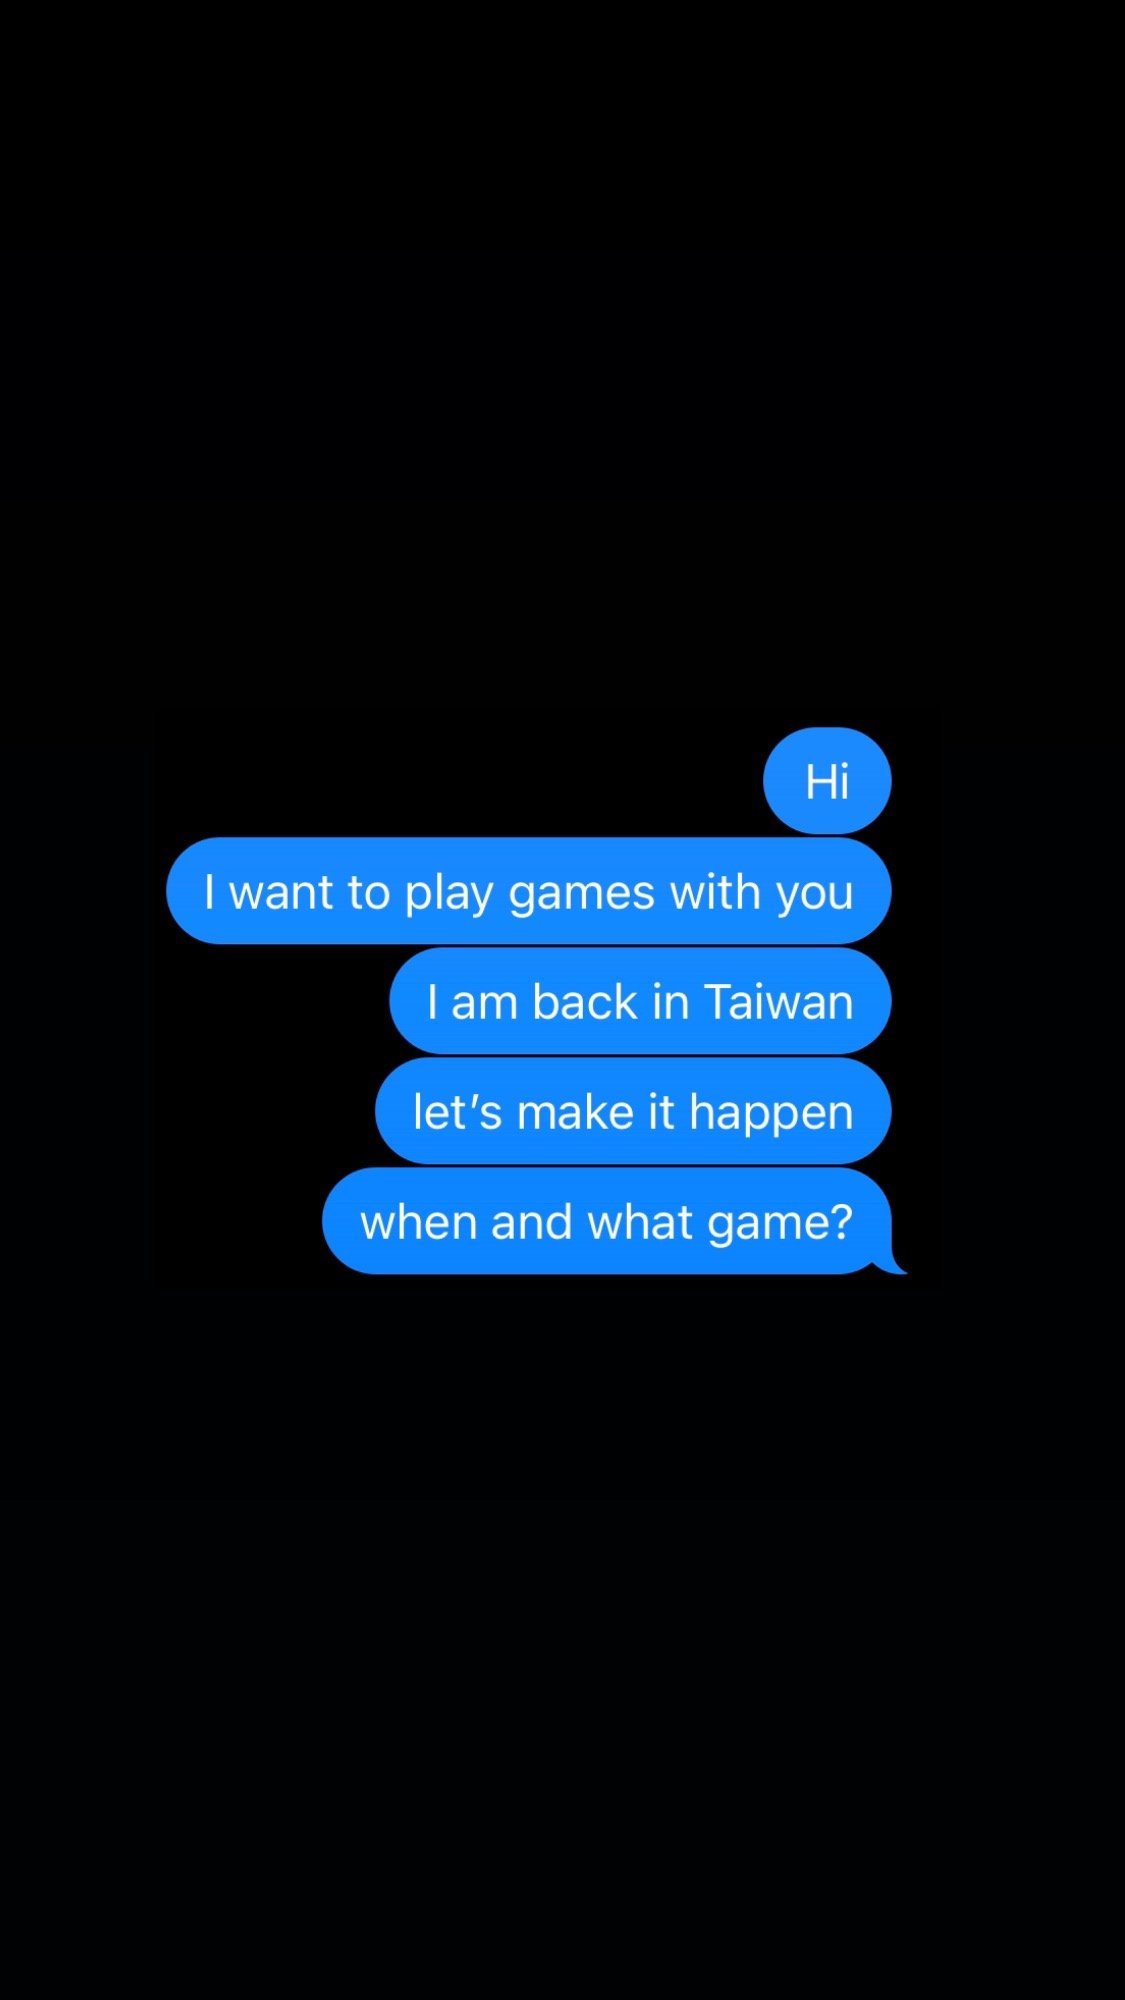 text I sent: hi I want to play games with you. I am back in Taiwan. let’s make it happen. when and what game?
